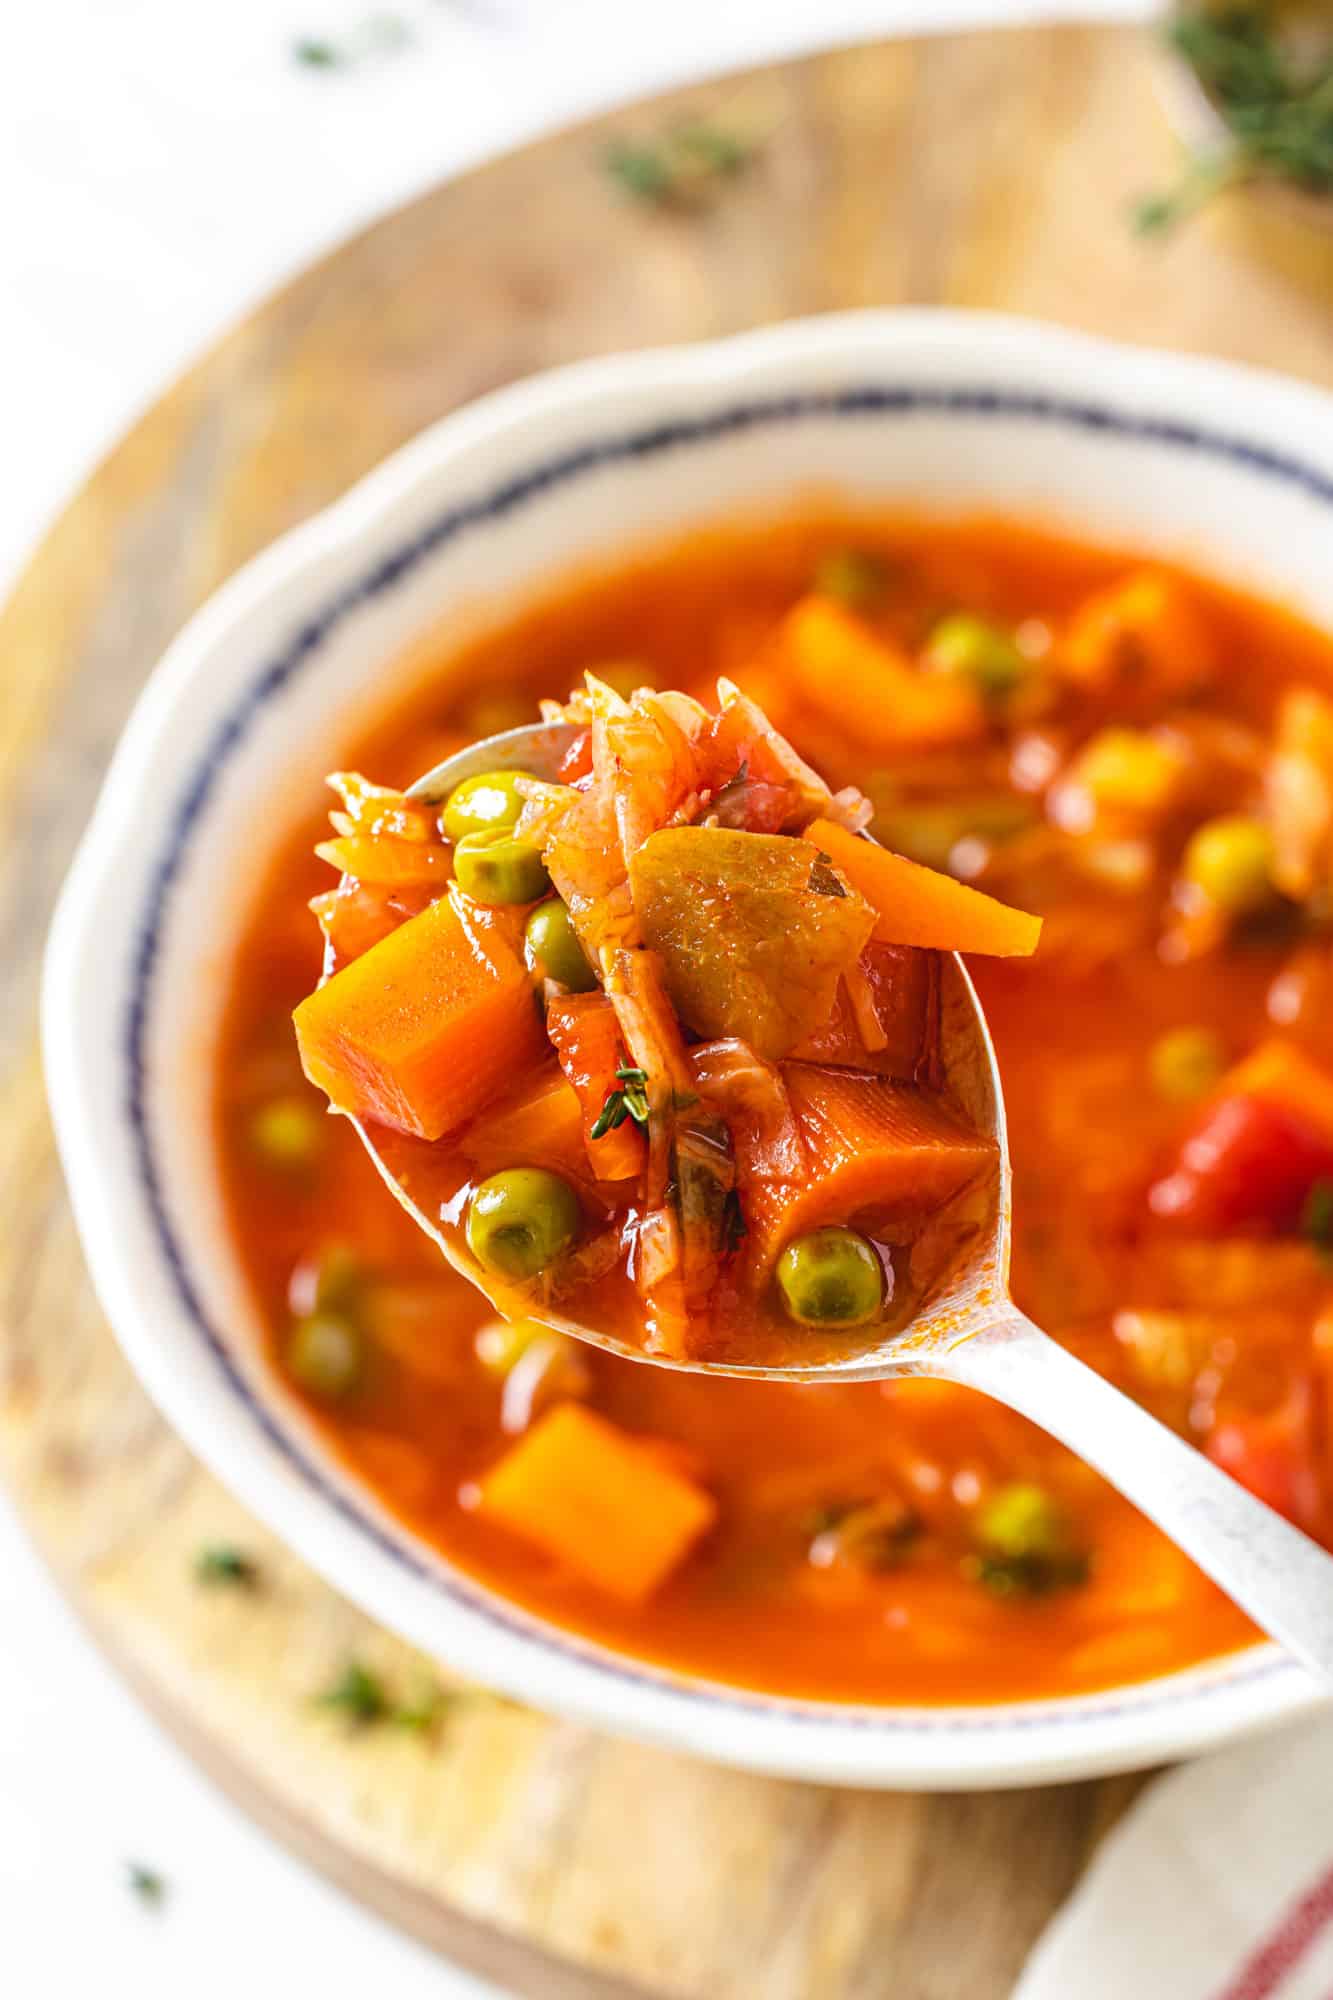 A spoon with vegetable soup and a bowl in the background.